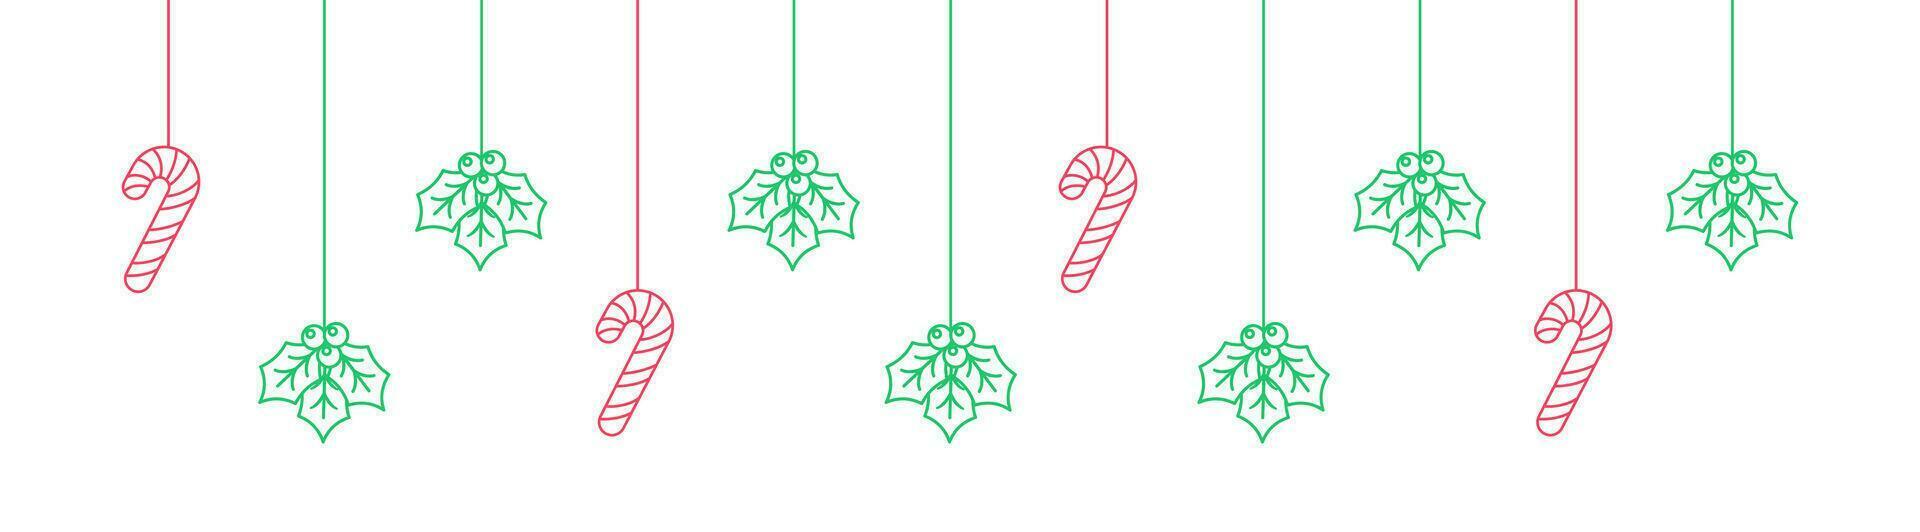 Merry Christmas Border Banner Outline Doodle, Hanging Mistletoe and Candy Cane Garland. Winter Holiday Season Header Decoration. Web Banner Template. Vector illustration.